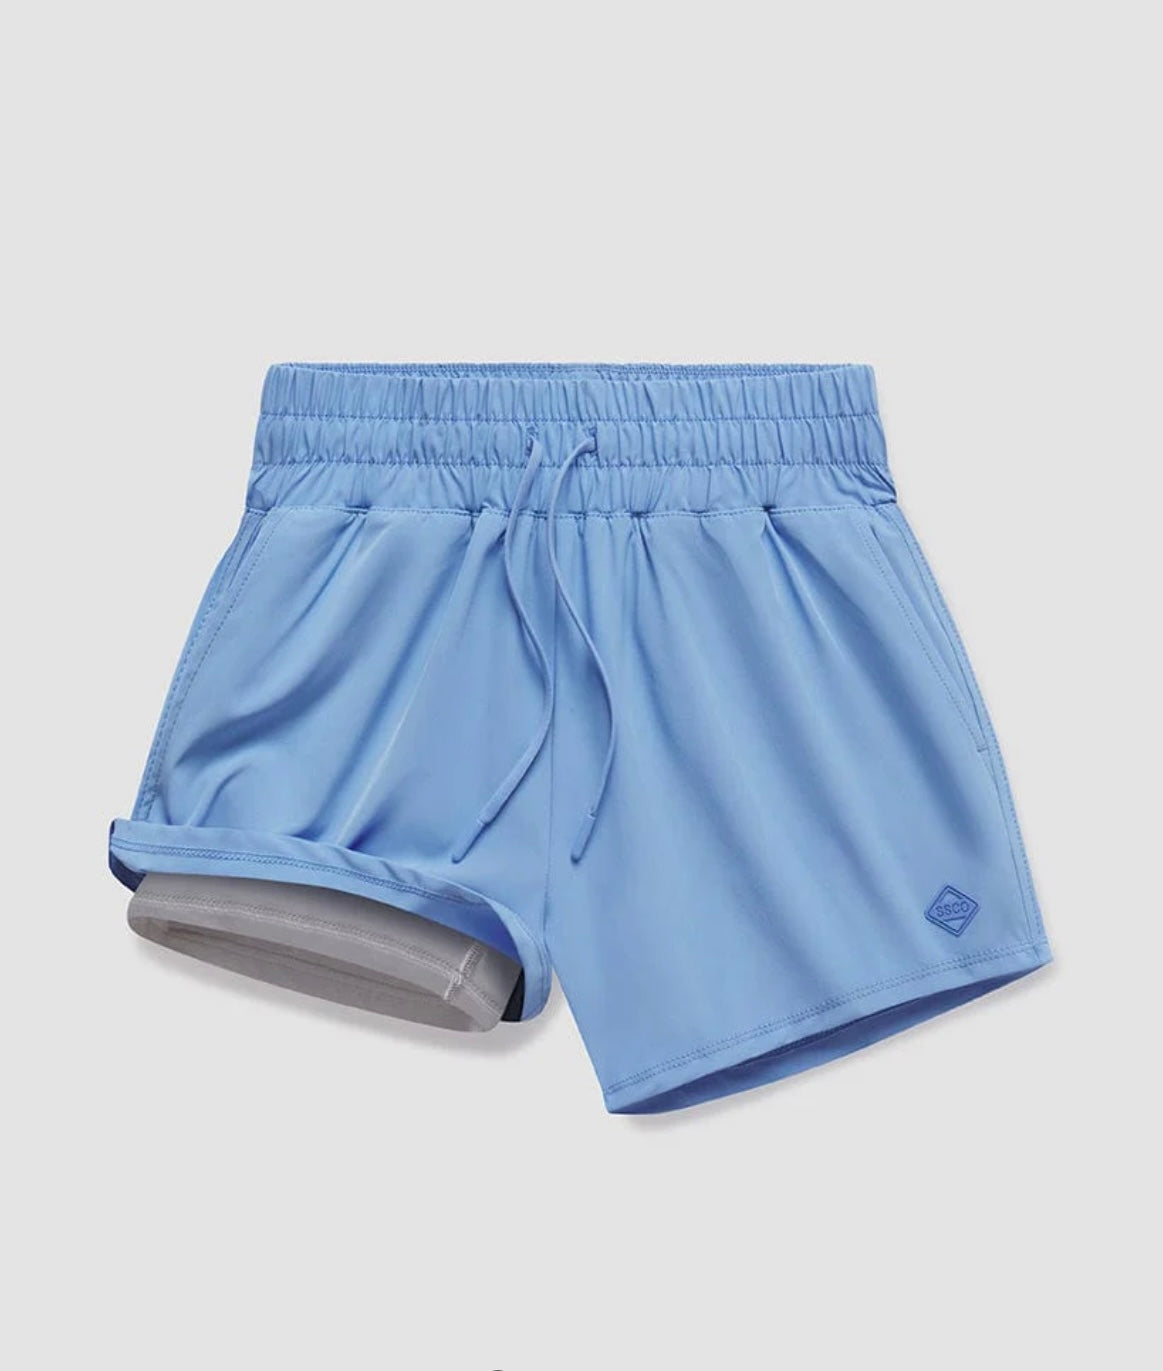 Women’s Hybrid Shorts in Blue Dreams by Southern Shirt Co.